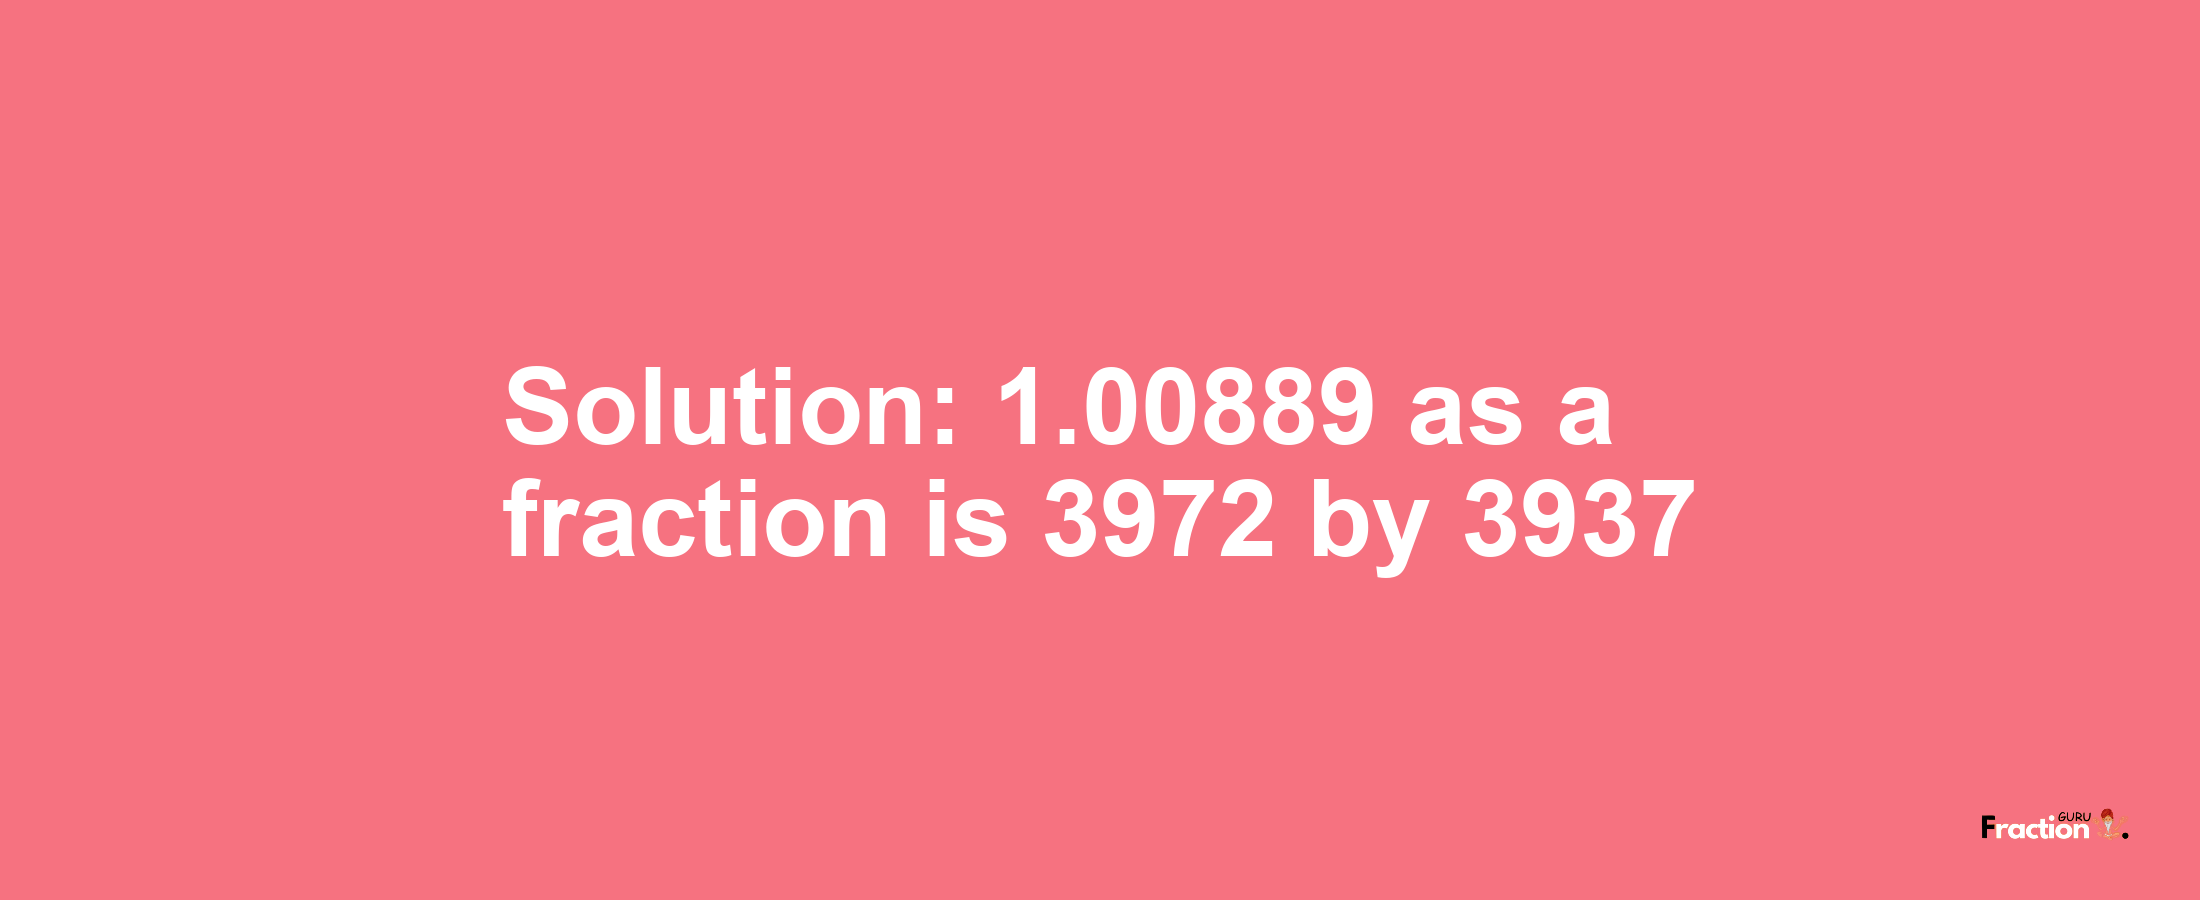 Solution:1.00889 as a fraction is 3972/3937